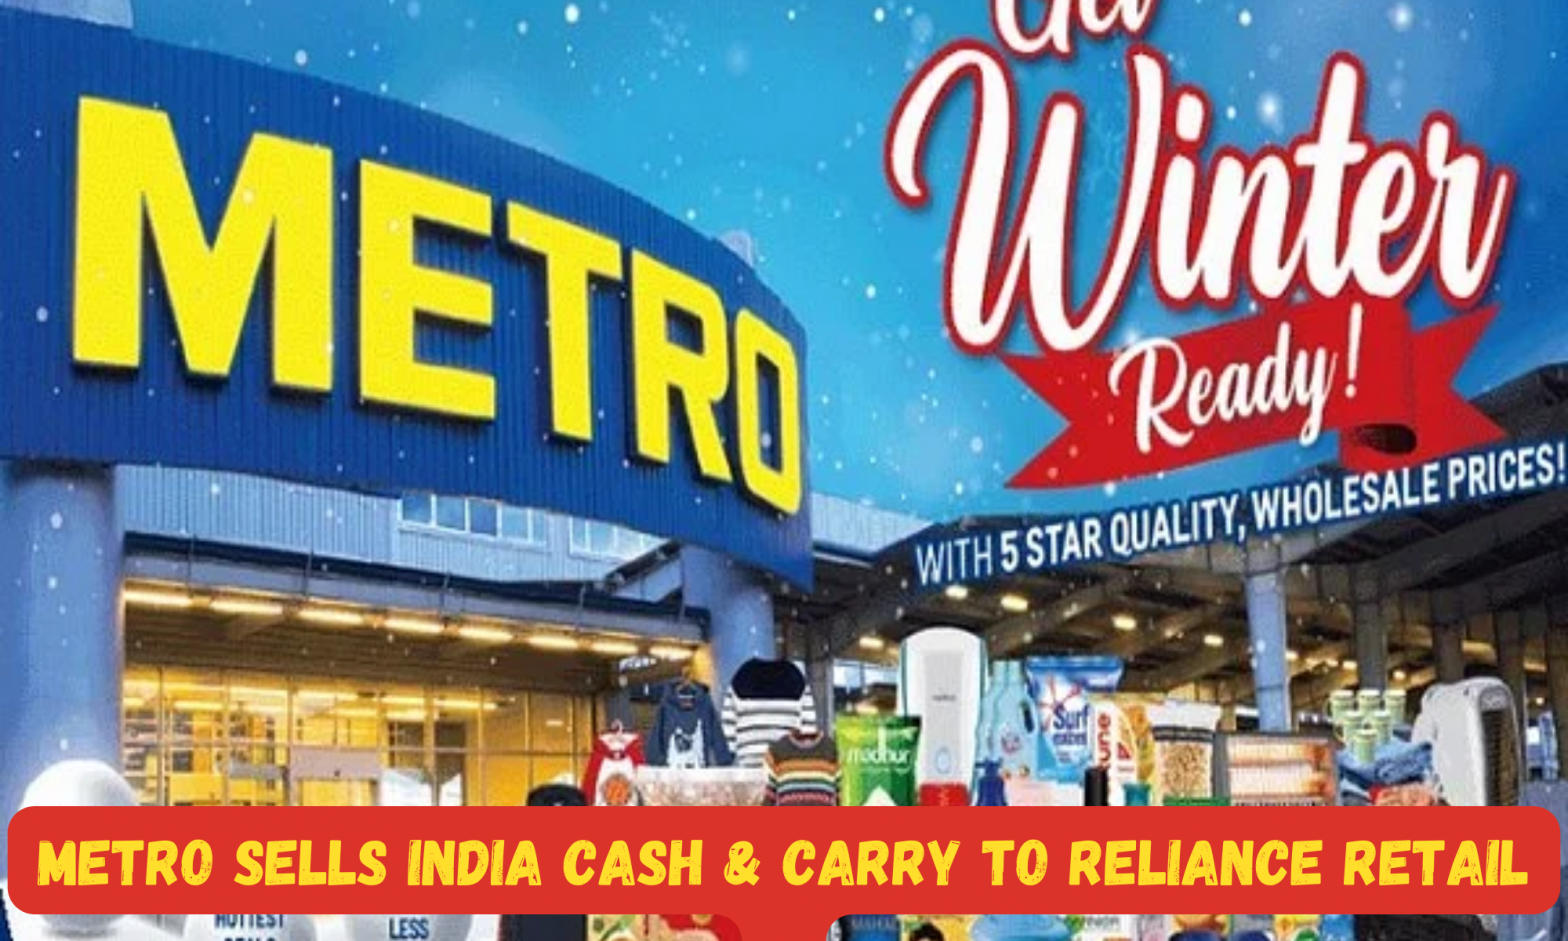 METRO sells India Cash & Carry to Reliance Retail for Rs 2,850cr